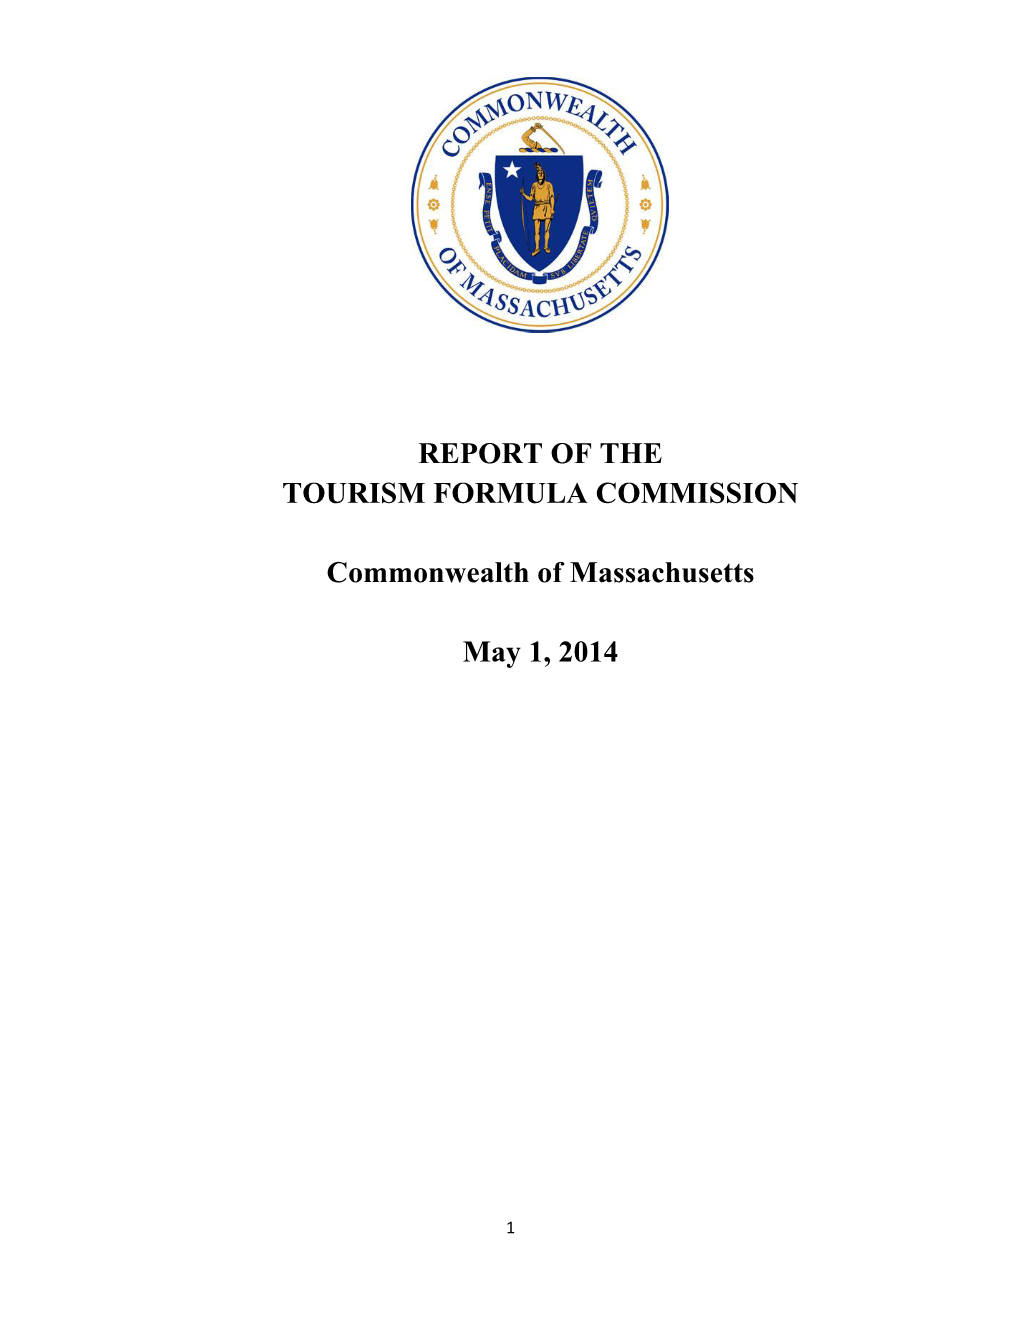 Report of the Tourism Formula Commission